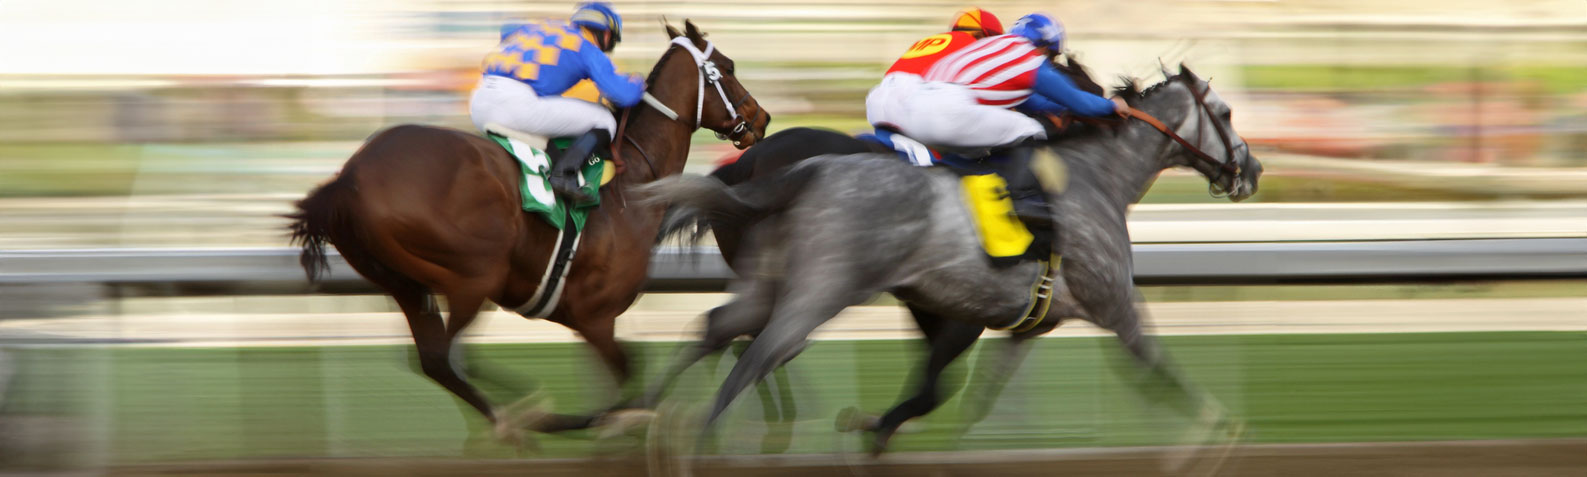 Blurred image of fast racehorses